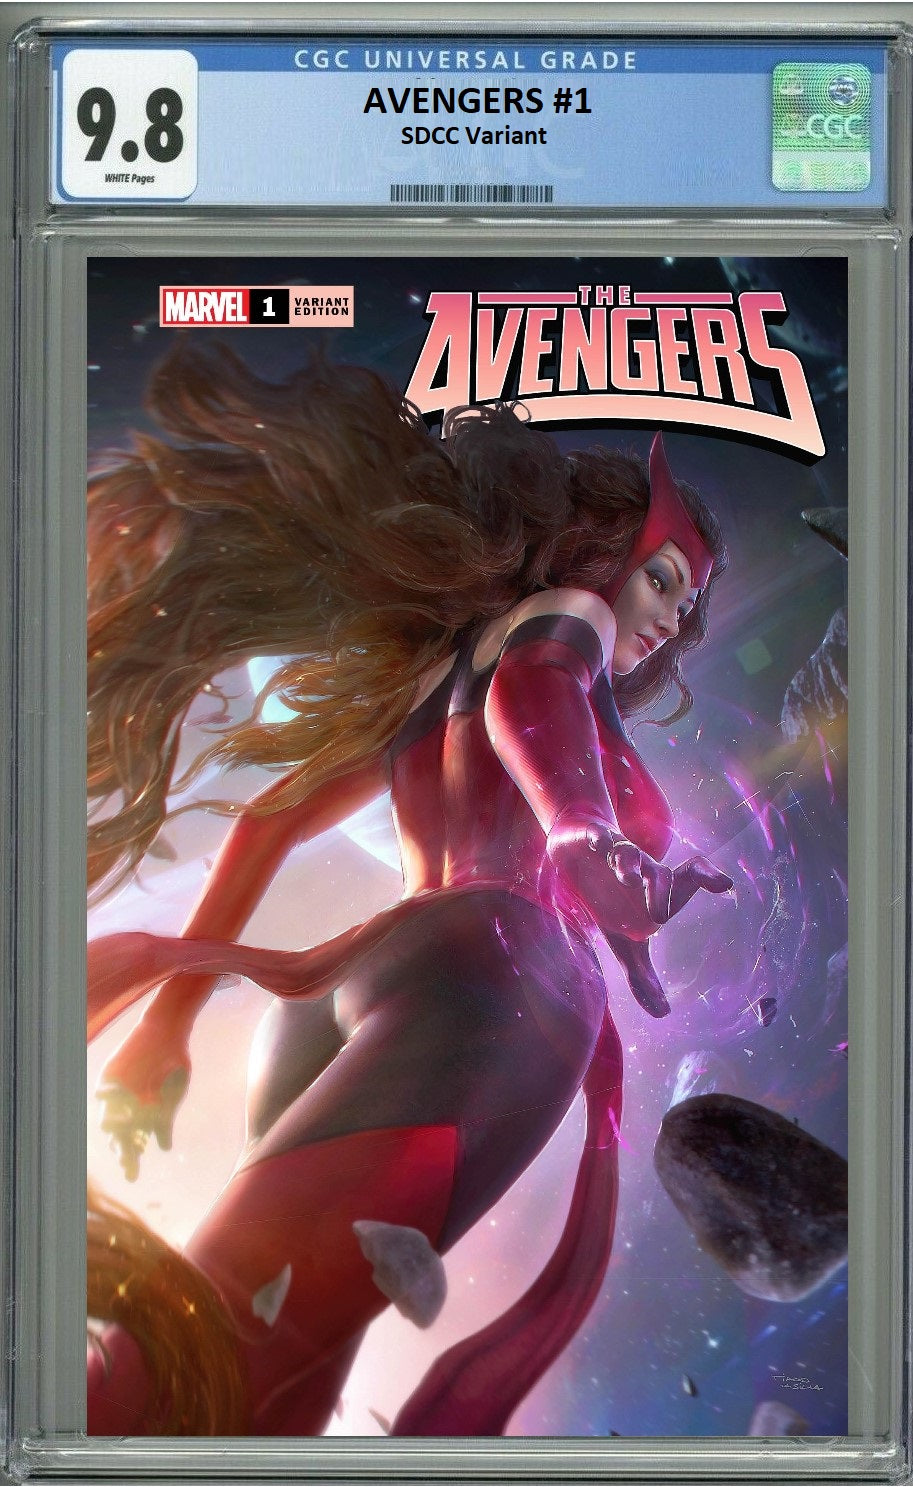 AVENGERS #1 TIAGO DA SILVA SDCC VARAINT LIMITED TO 600 WITH NUMBERED COA - RAW & GRADED OPTIONS